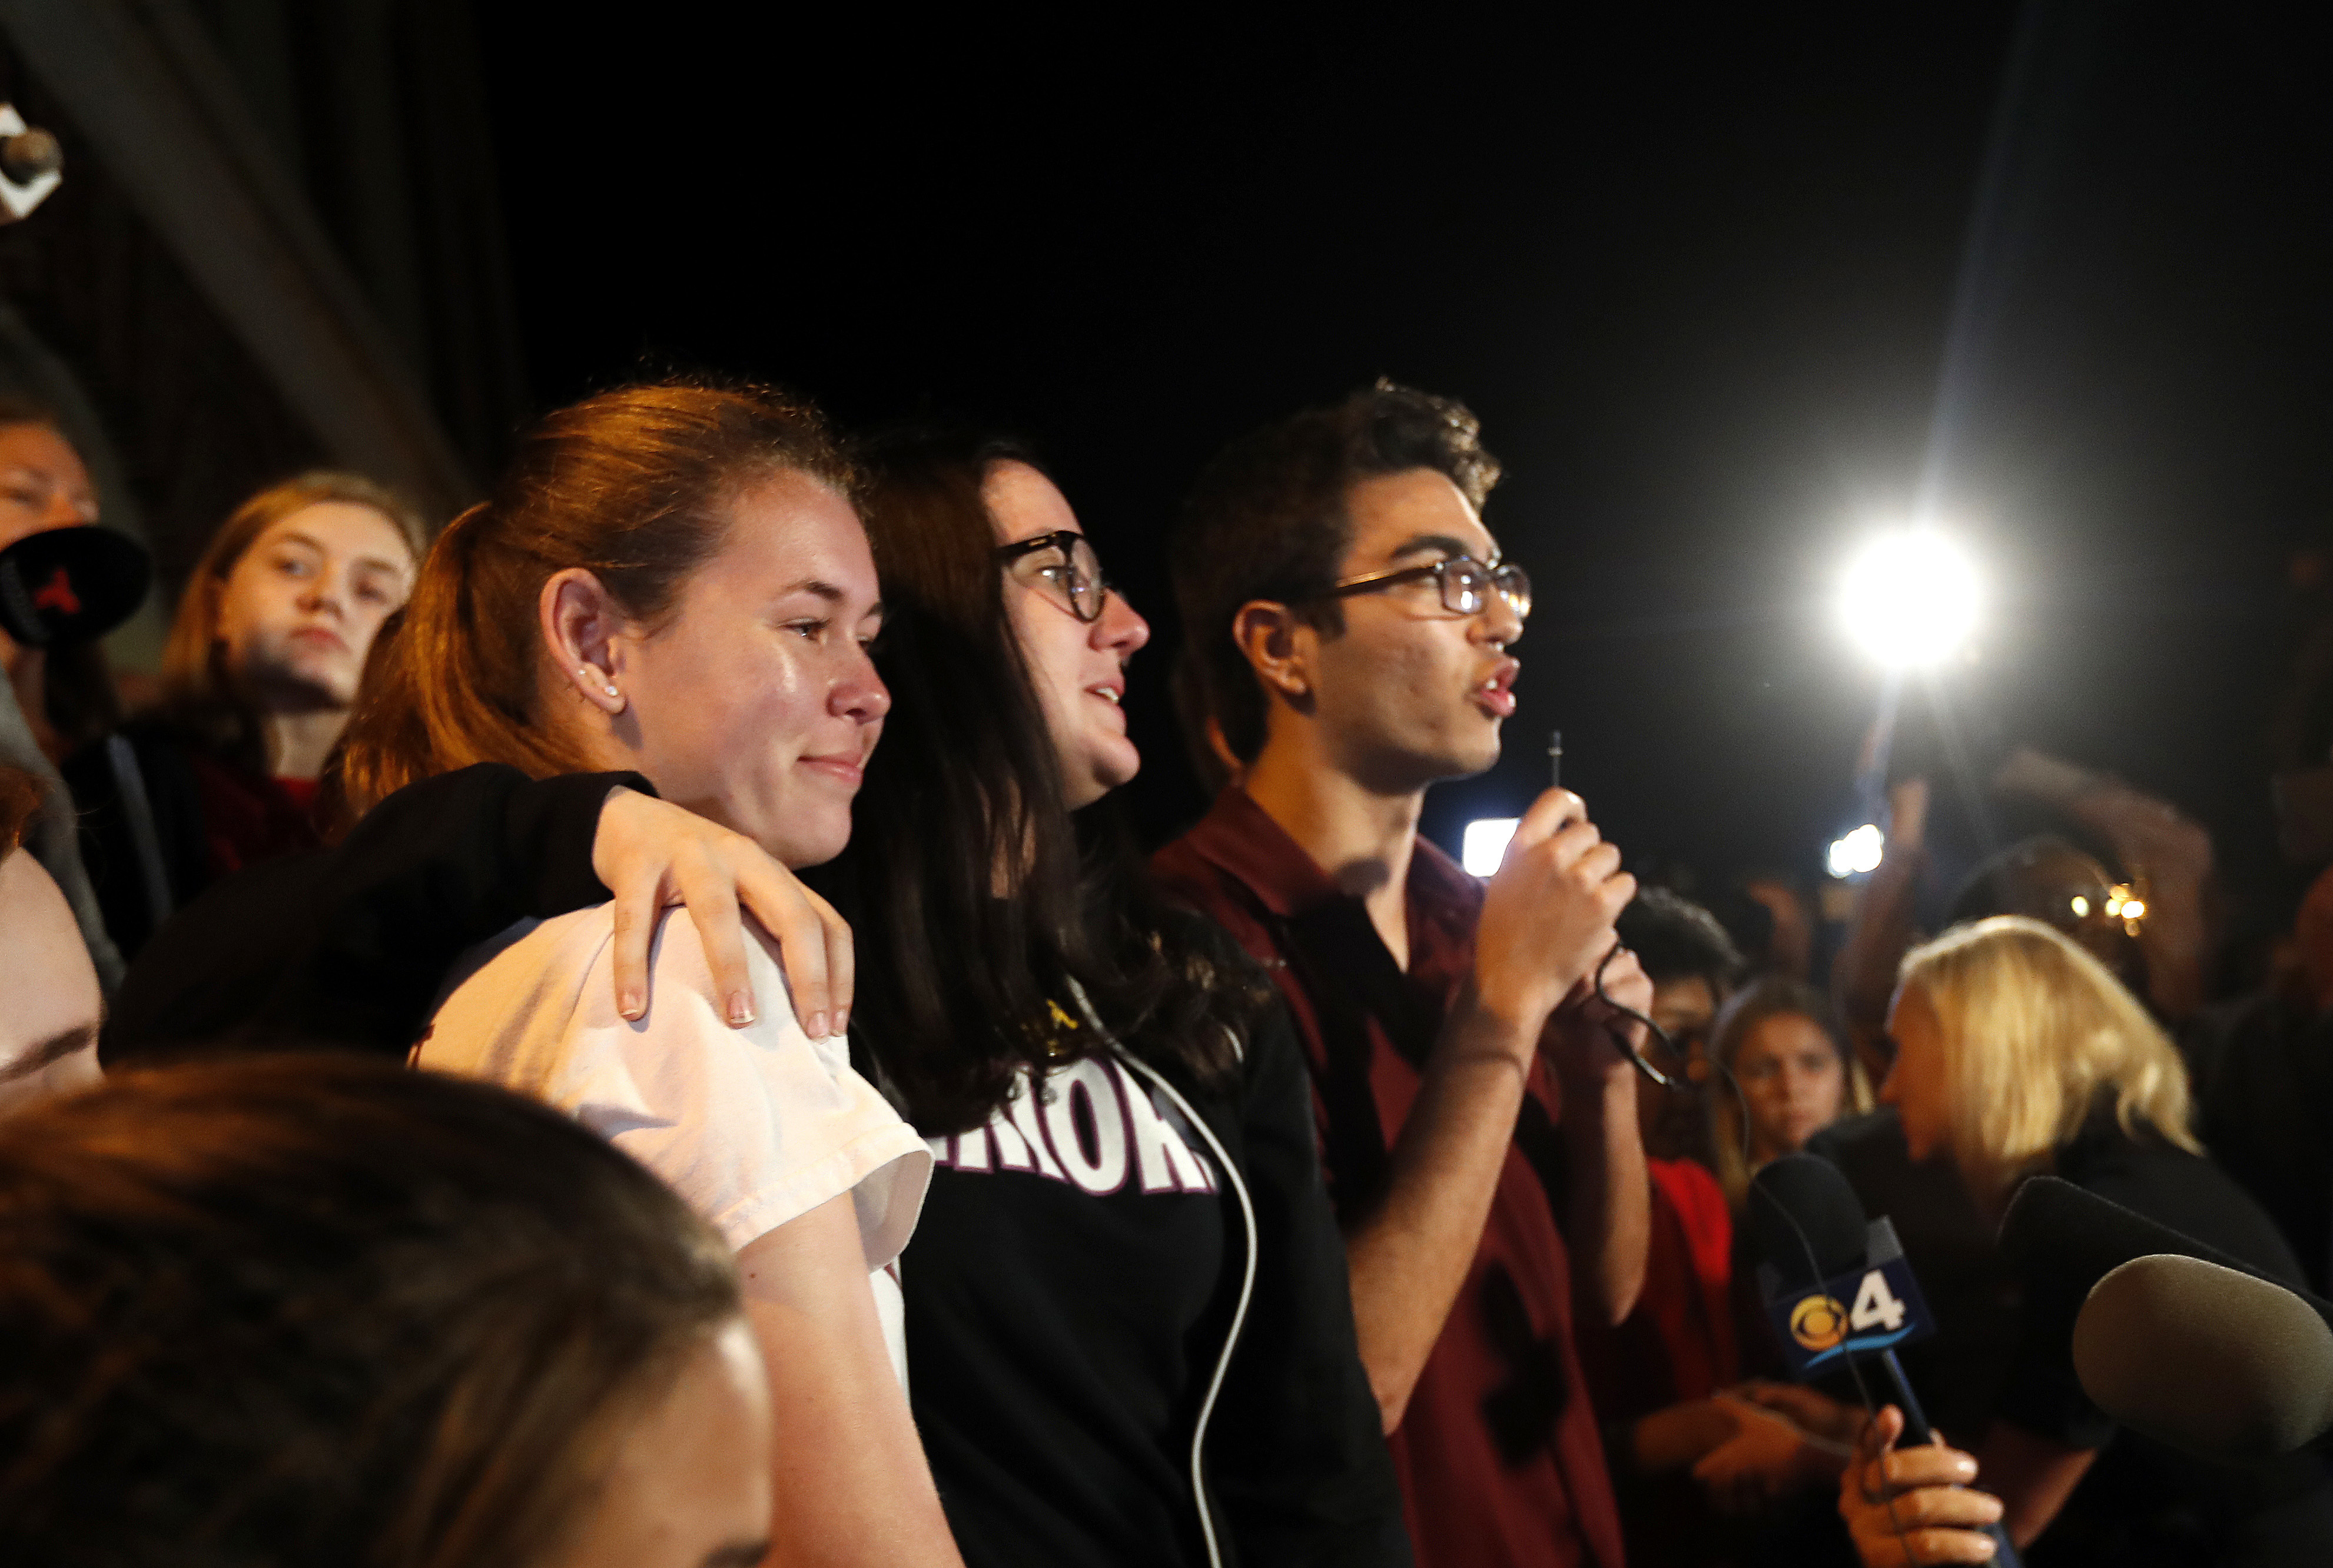 Diego Pfeiffer, a student survivor from Marjory Stoneman Douglas High School, where 17 students and faculty were killed in a mass shooting on Wednesday, speaks to a crowd of supporters and media, while fellow survivors Sophie Whitney, left, and Sarah Chadwick embrace after they arrived at Leon High School, in Tallahassee, Fla., Tuesday, Feb. 20, 2018. The students arrived in the state's capital to talk to legislators and rally for gun control reform. (AP Photo/Gerald Herbert)